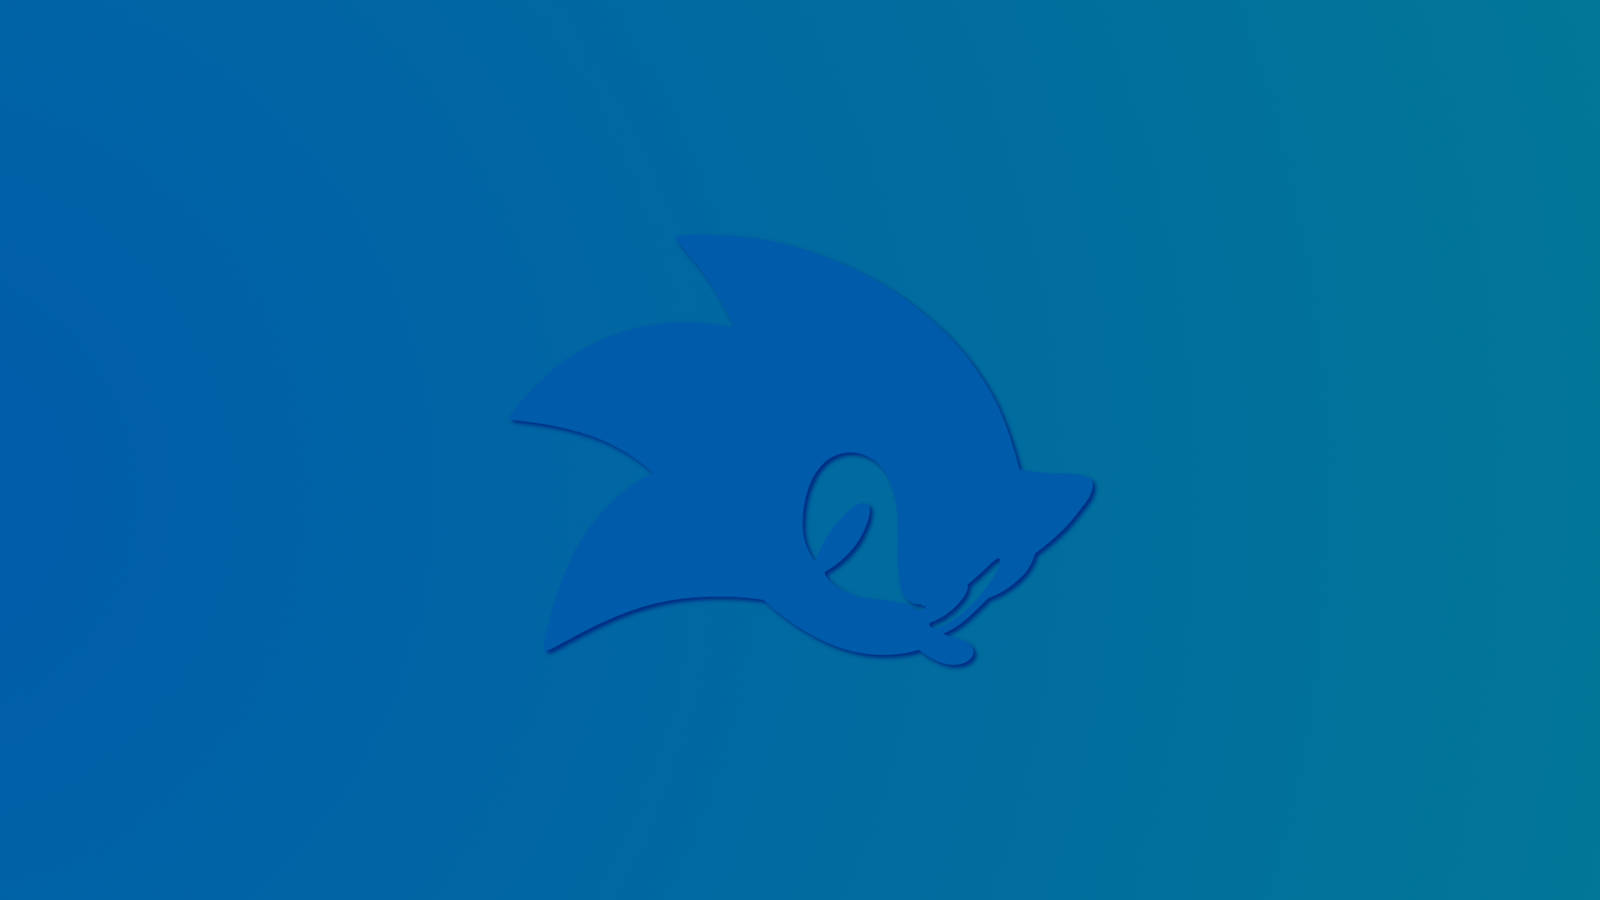 Blue Sonic Icon Photo Cover Background